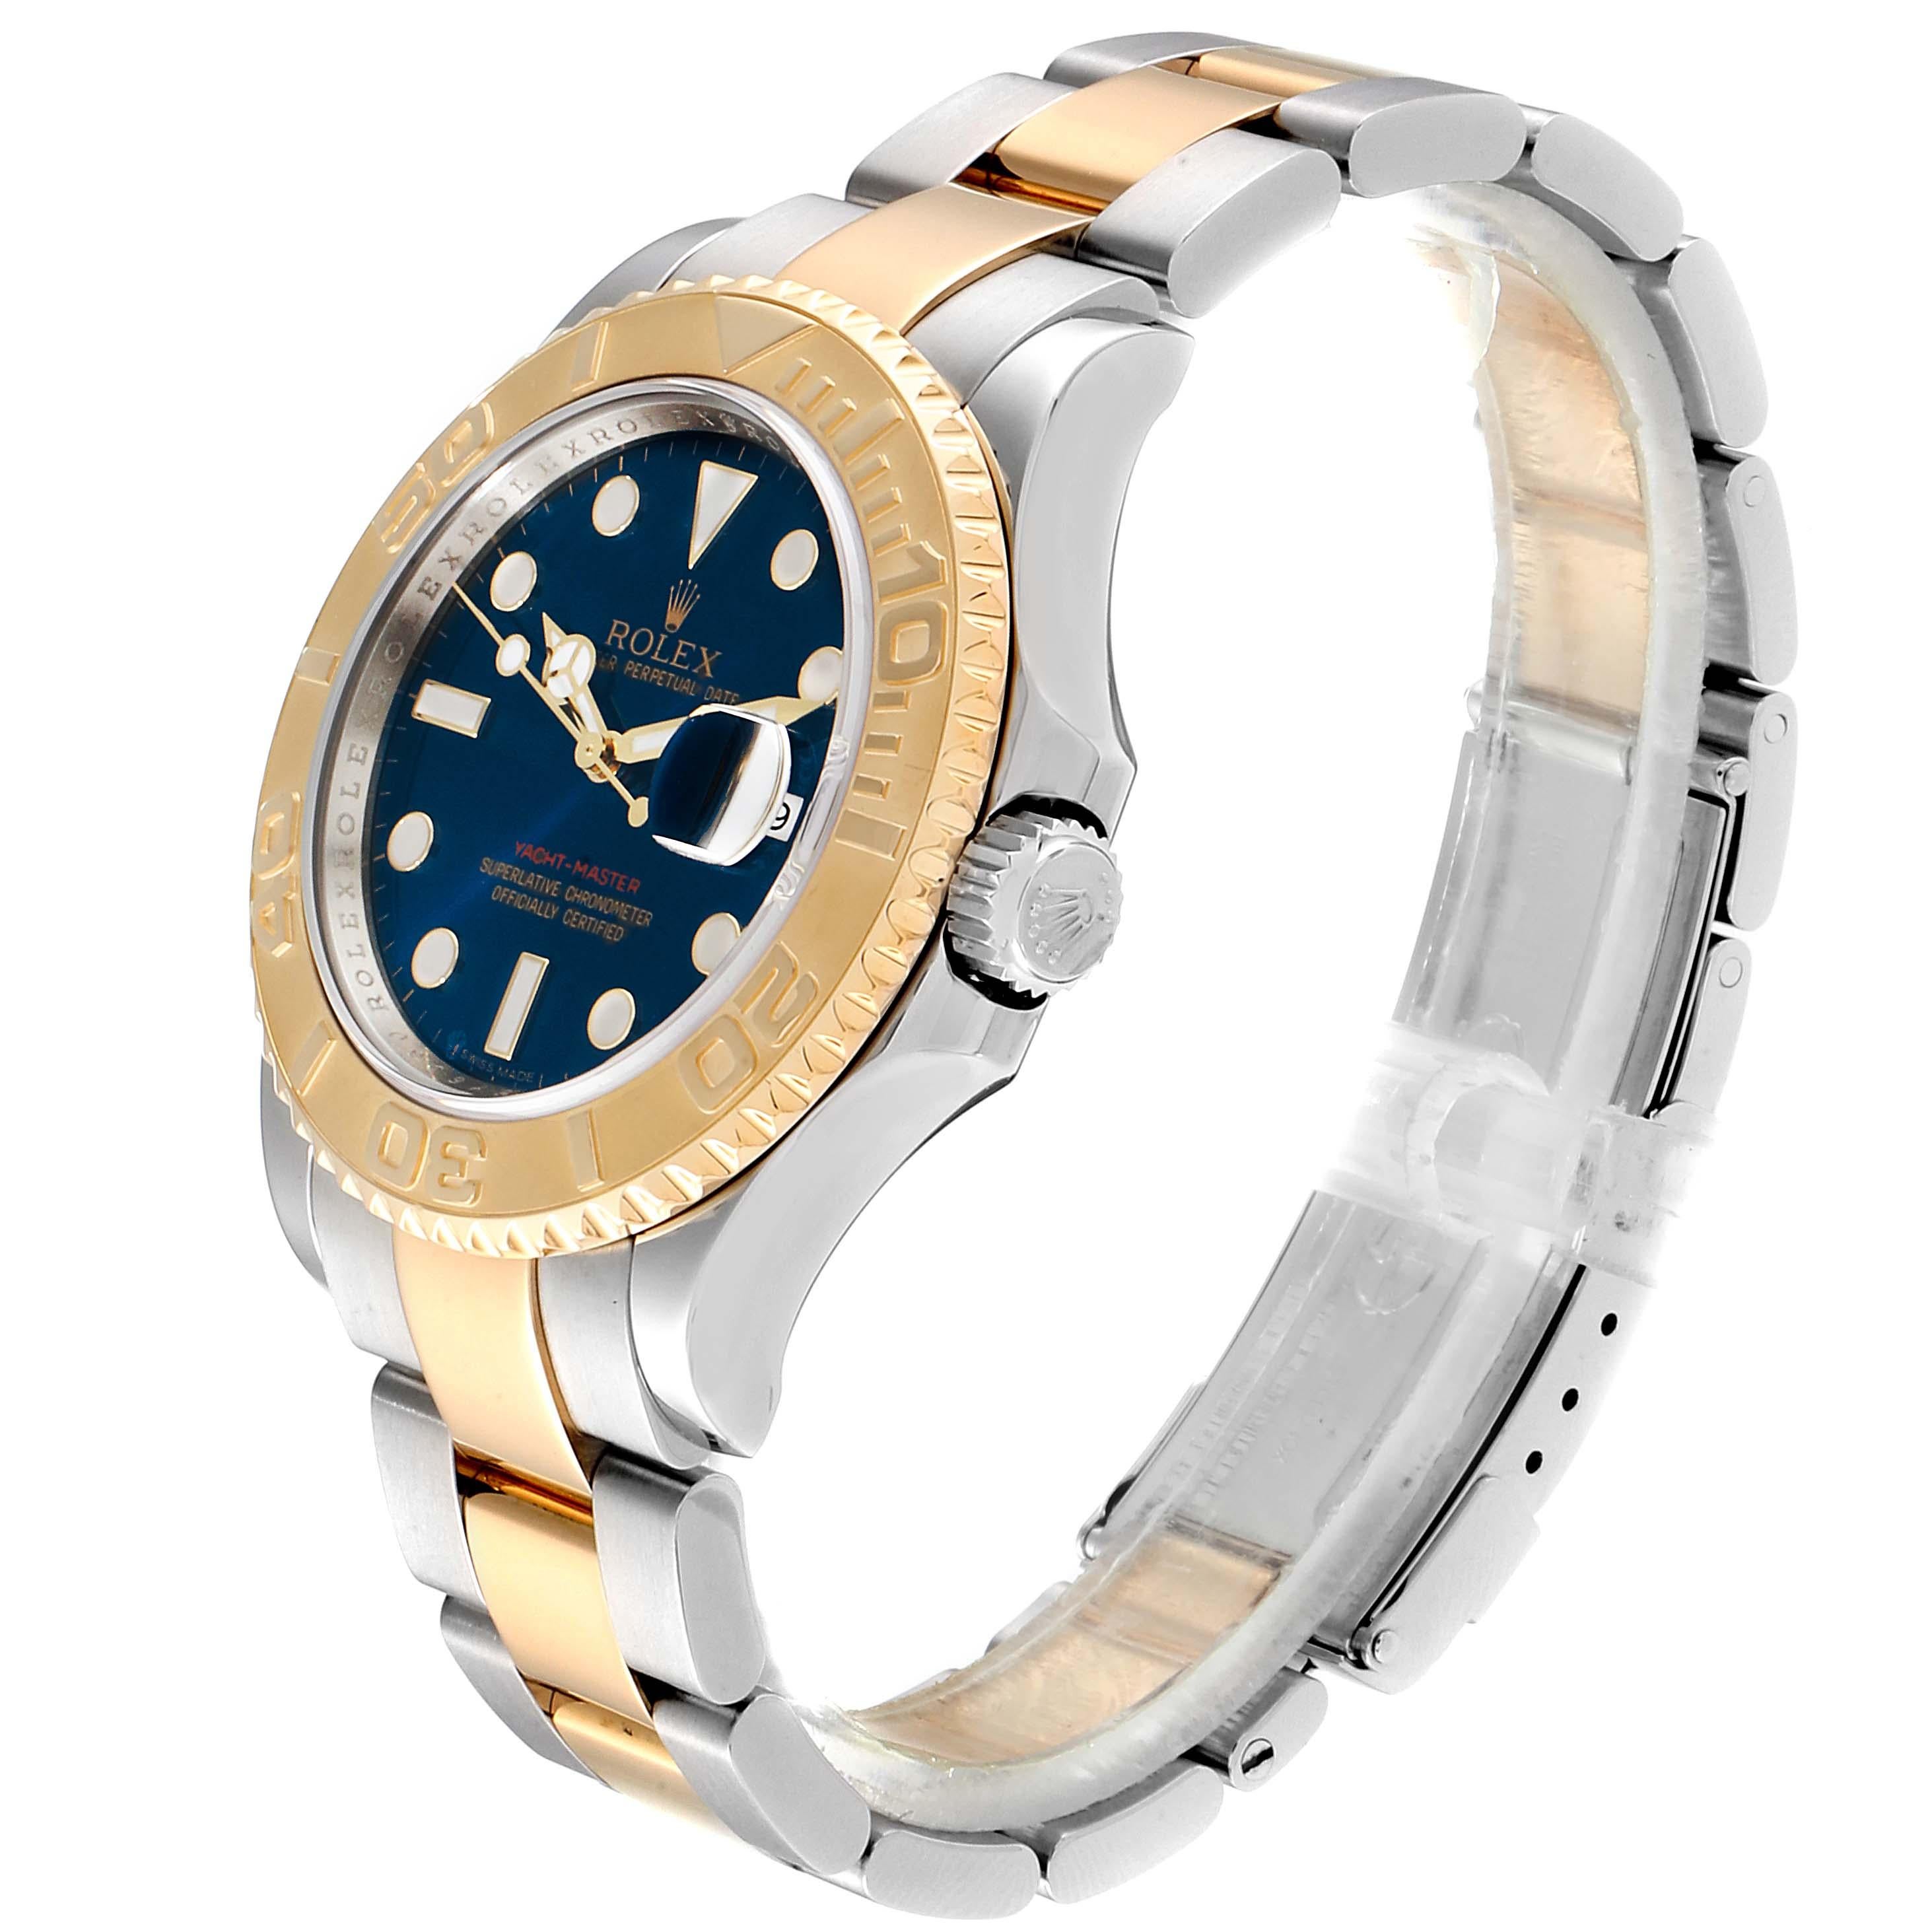 Rolex Yachtmaster Steel Yellow Gold Blue Dial Men's Watch 16623 1